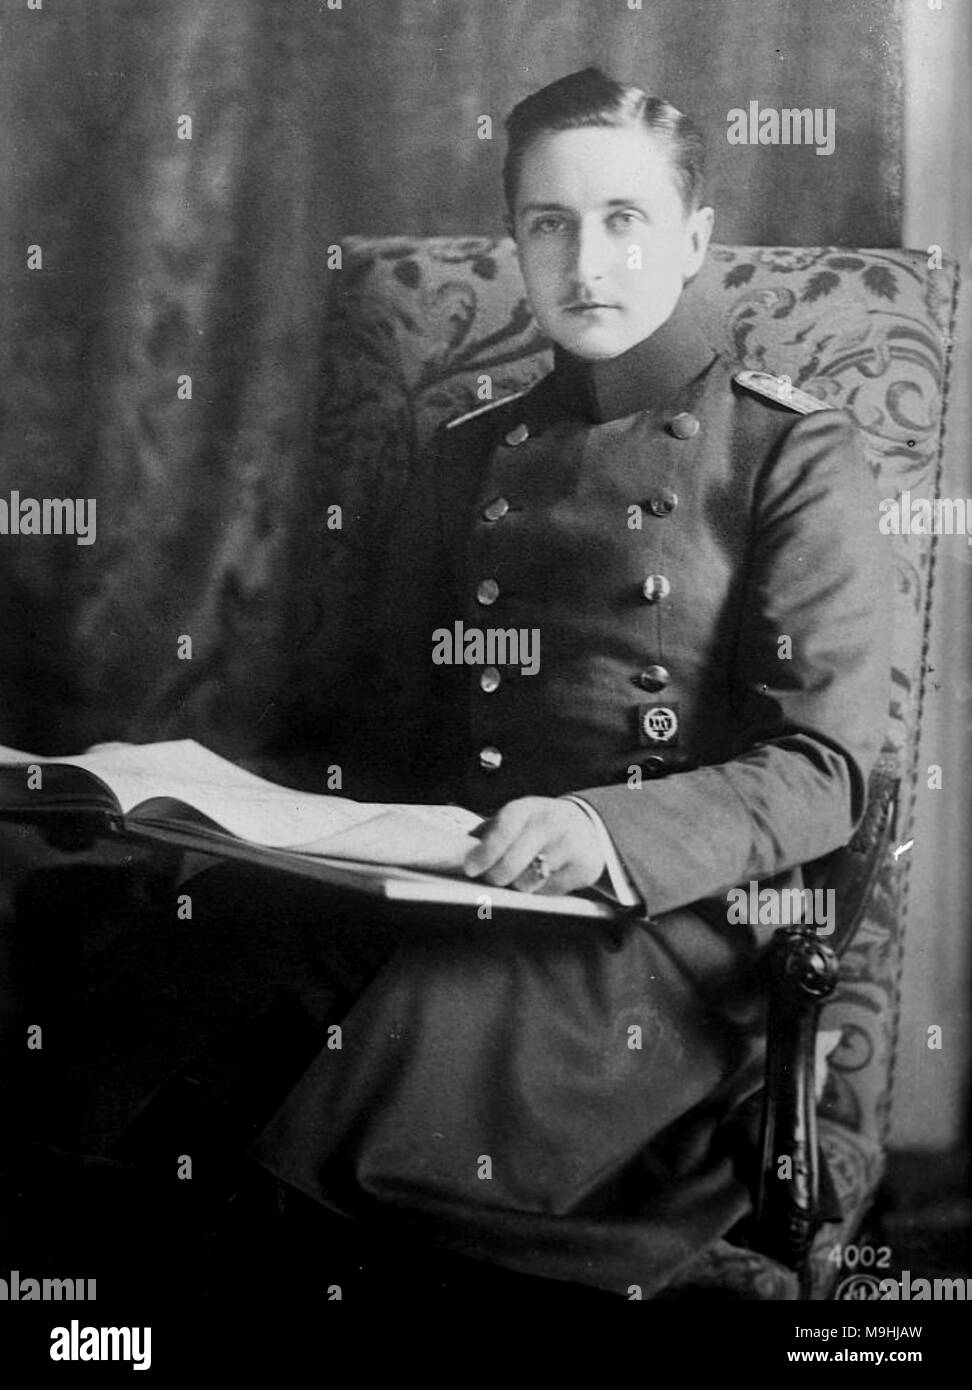 Prince August Wilhelm of Prussia, Prince August Wilhelm Heinrich Günther Viktor of Prussia (1887 – 1949), called 'Auwi', was the fourth son of Emperor Wilhelm II, German Emperor by his first wife, Augusta Victoria of Schleswig-Holstein. Stock Photo